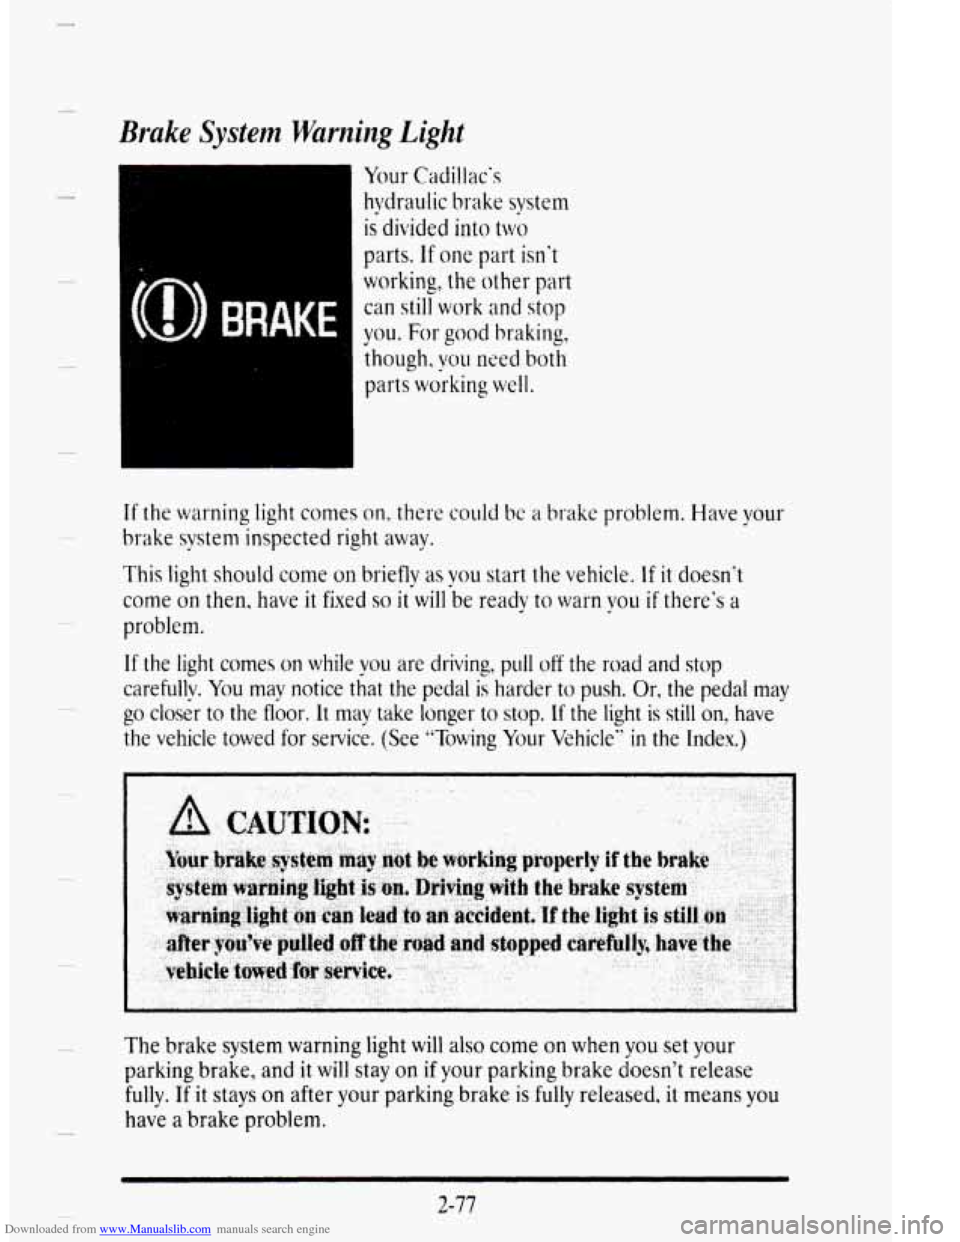 CADILLAC DEVILLE 1995 7.G Owners Manual Downloaded from www.Manualslib.com manuals search engine c 
Brake System Warning  Light 
(0) BRAKE 
Your Cadillacs 
hydraulic  brake system 
is divided into two 
parts. If one part isnt 
working, 
L